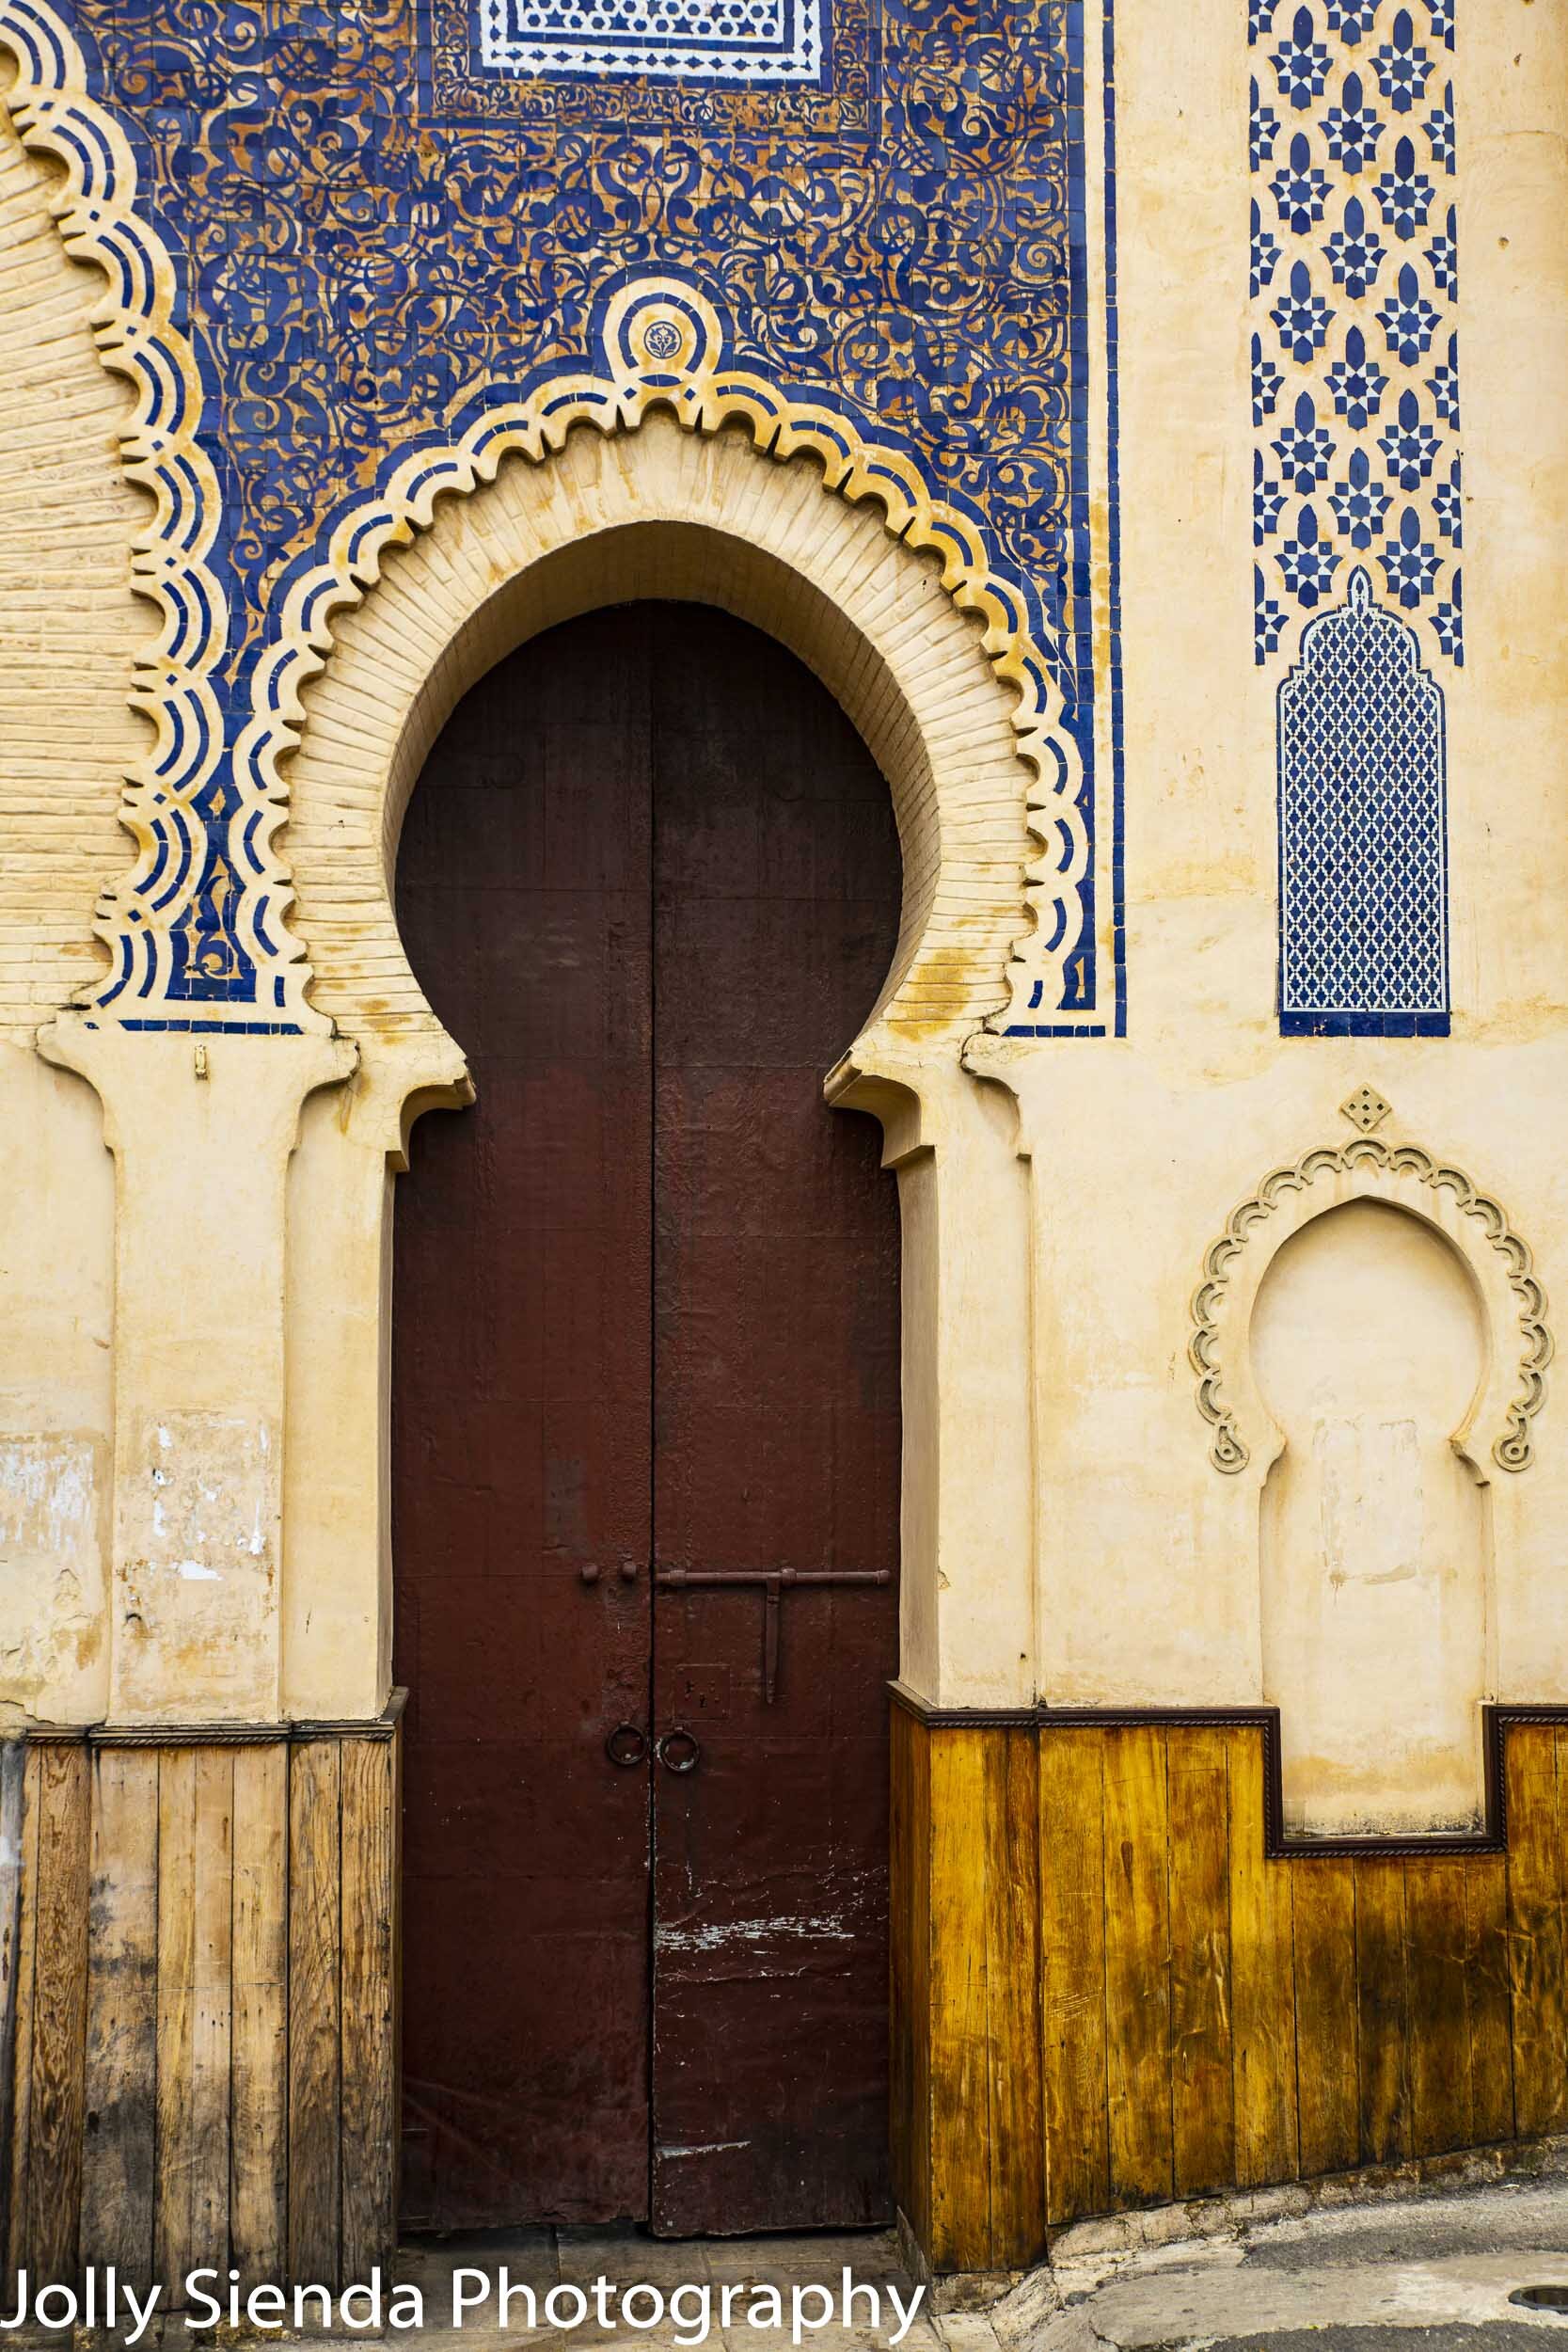 Arched door leading to the Blue Gate, Bab Bou Jeloud